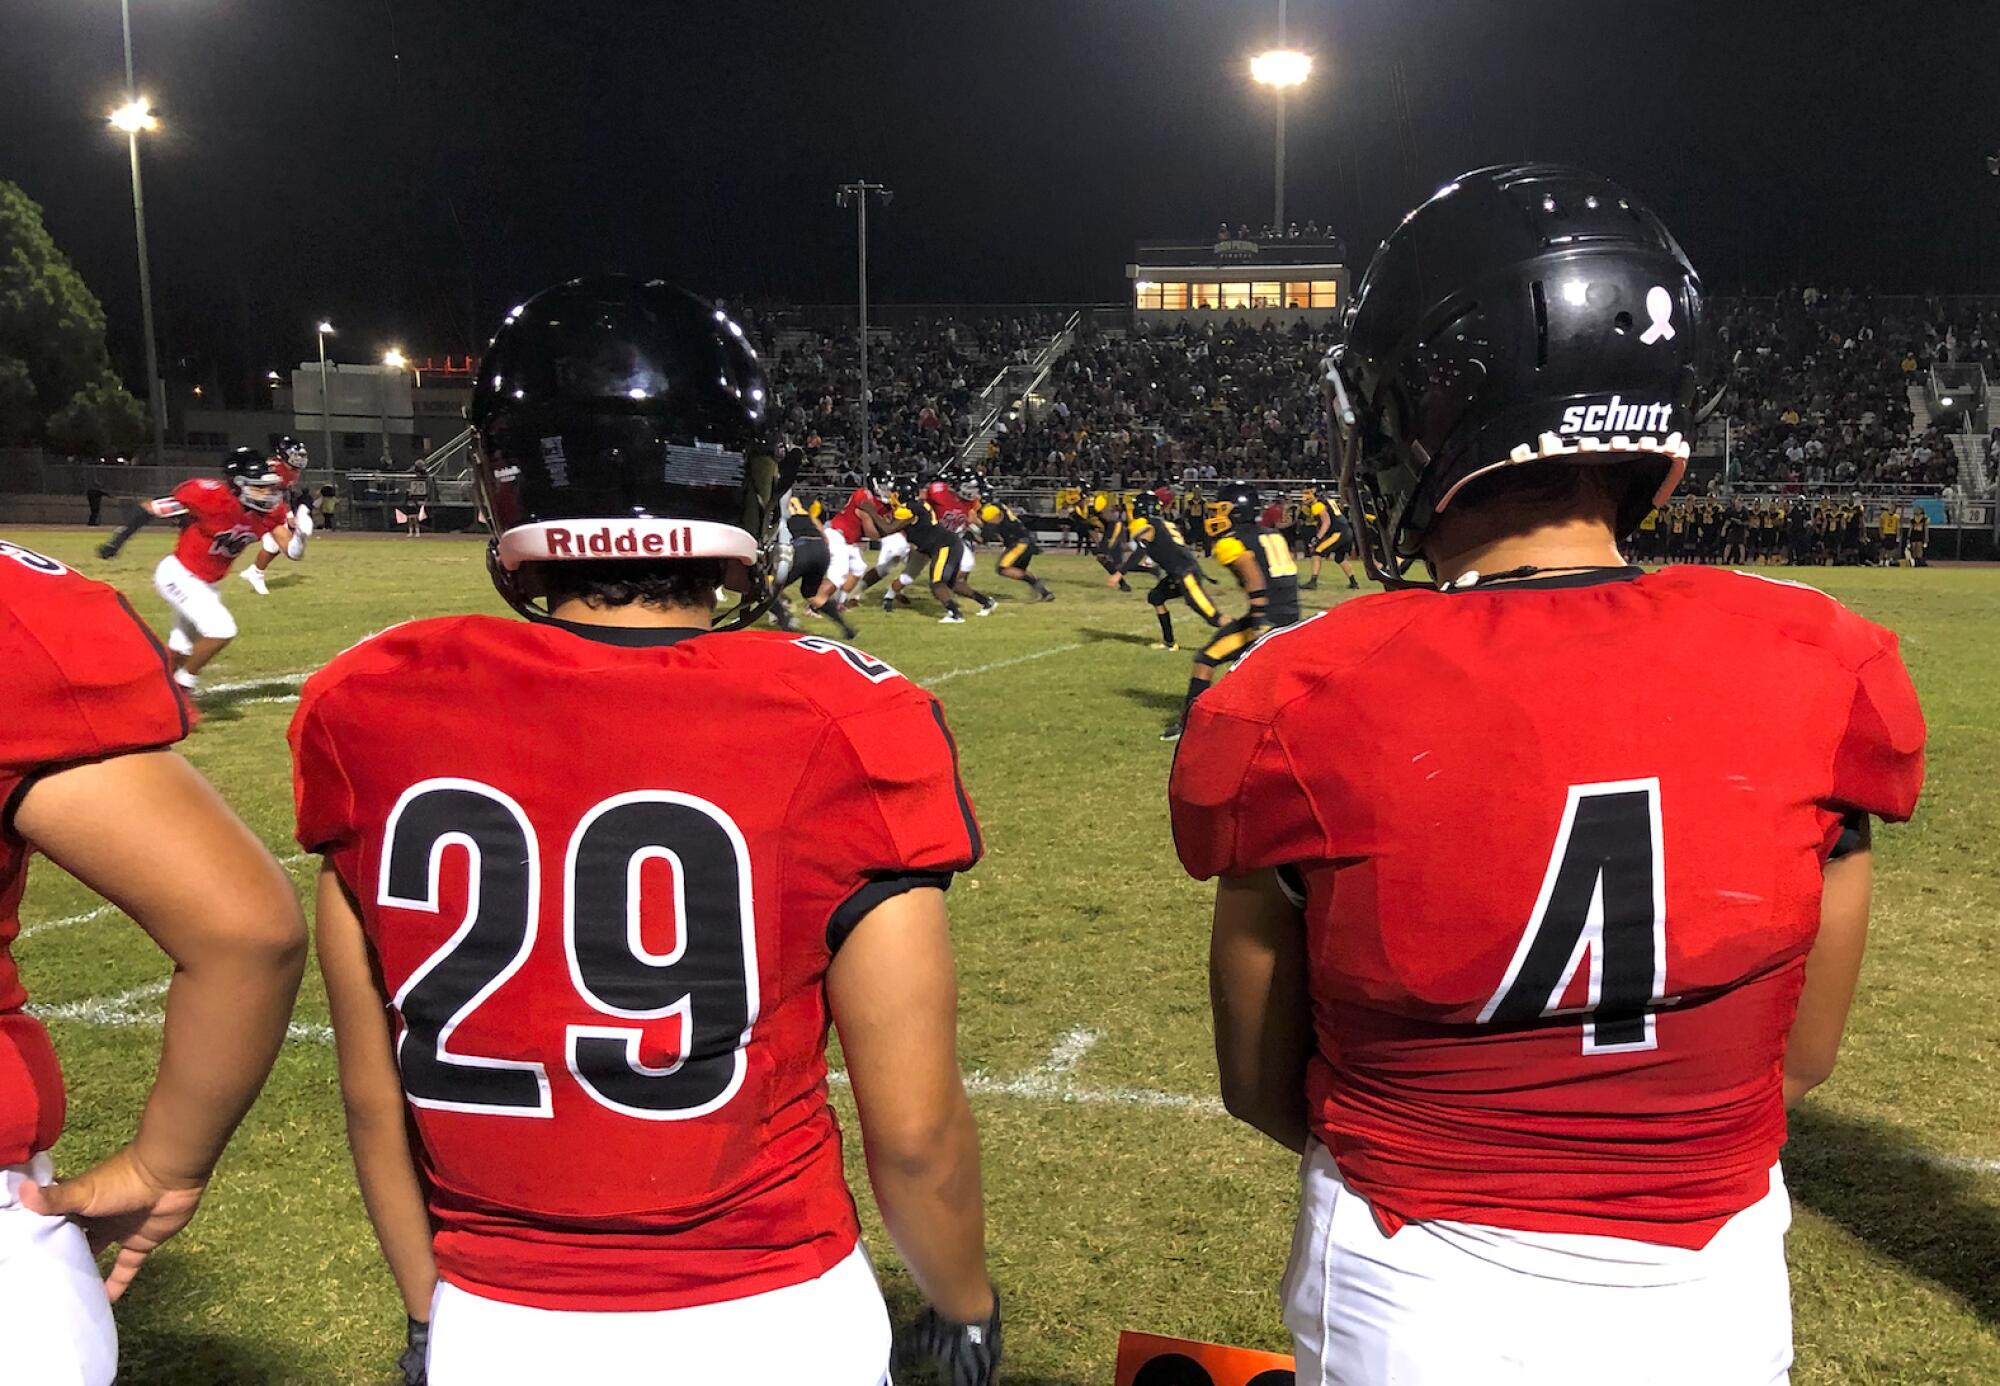 Banning players watch from side line during their annual rivalry game against San Pedro.